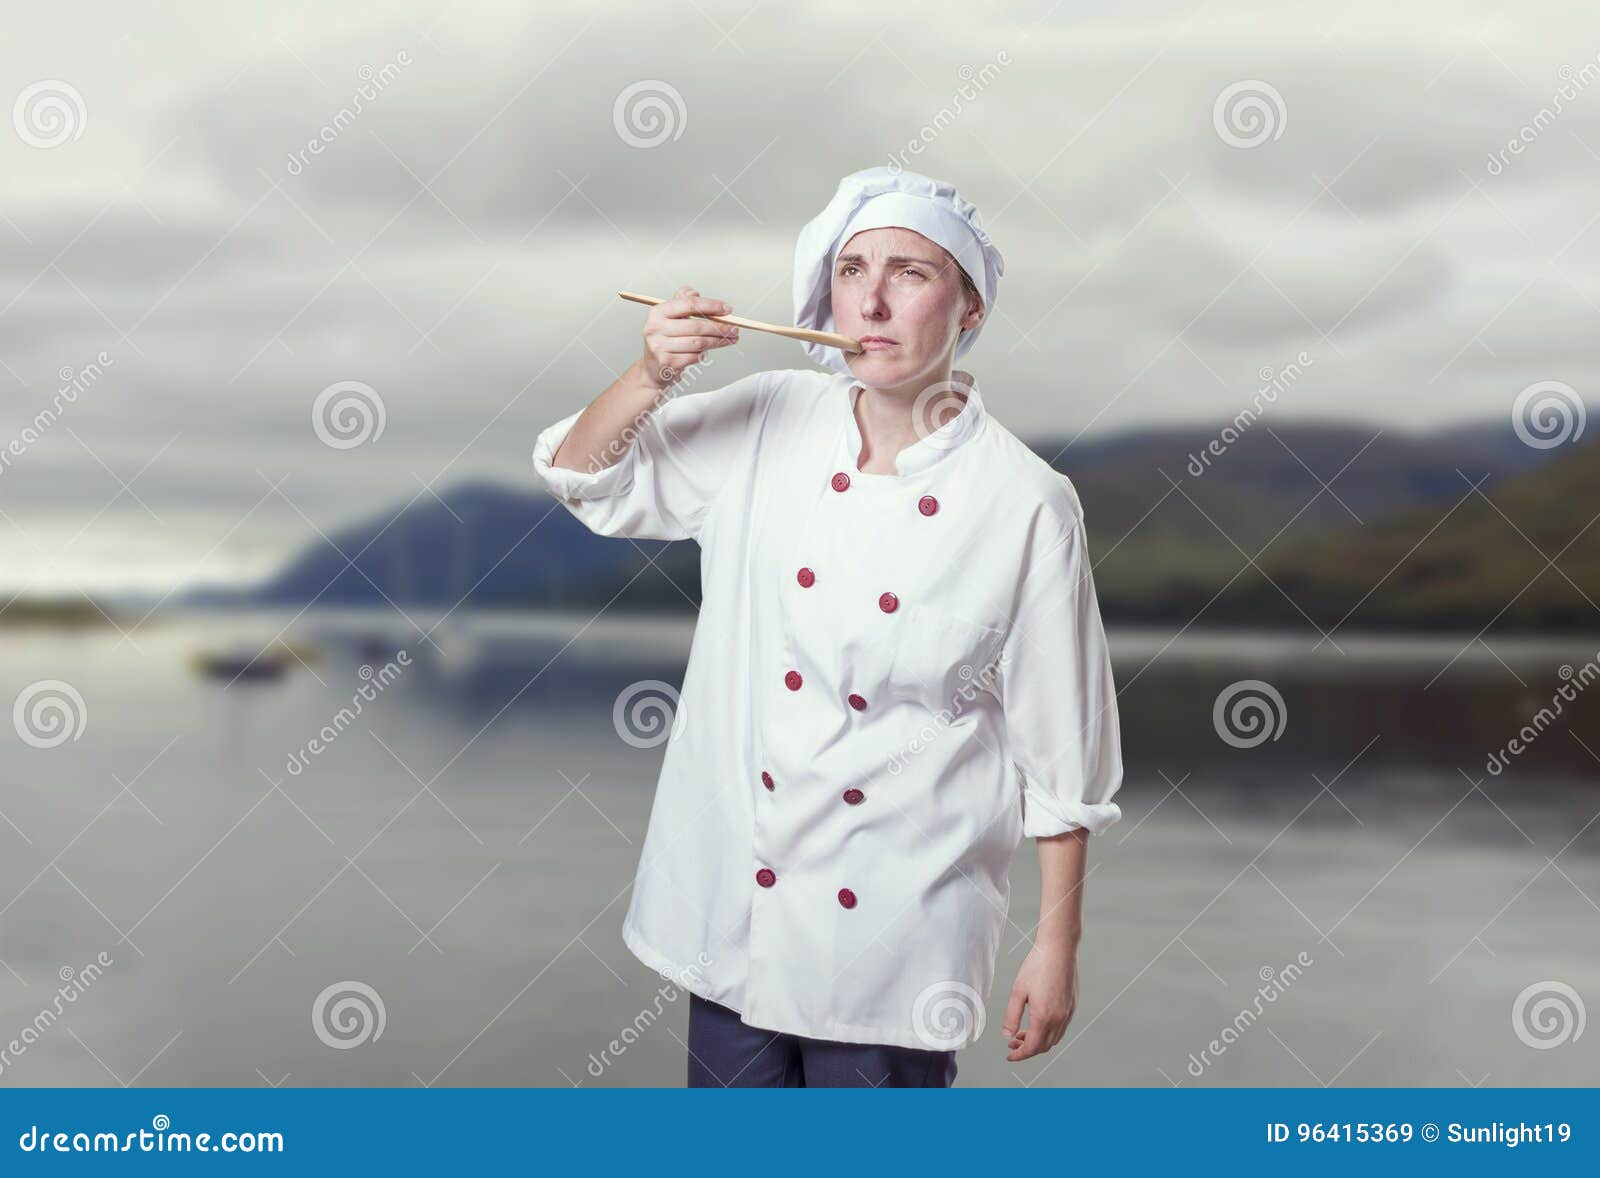 young woman chef is making a traste food gesture